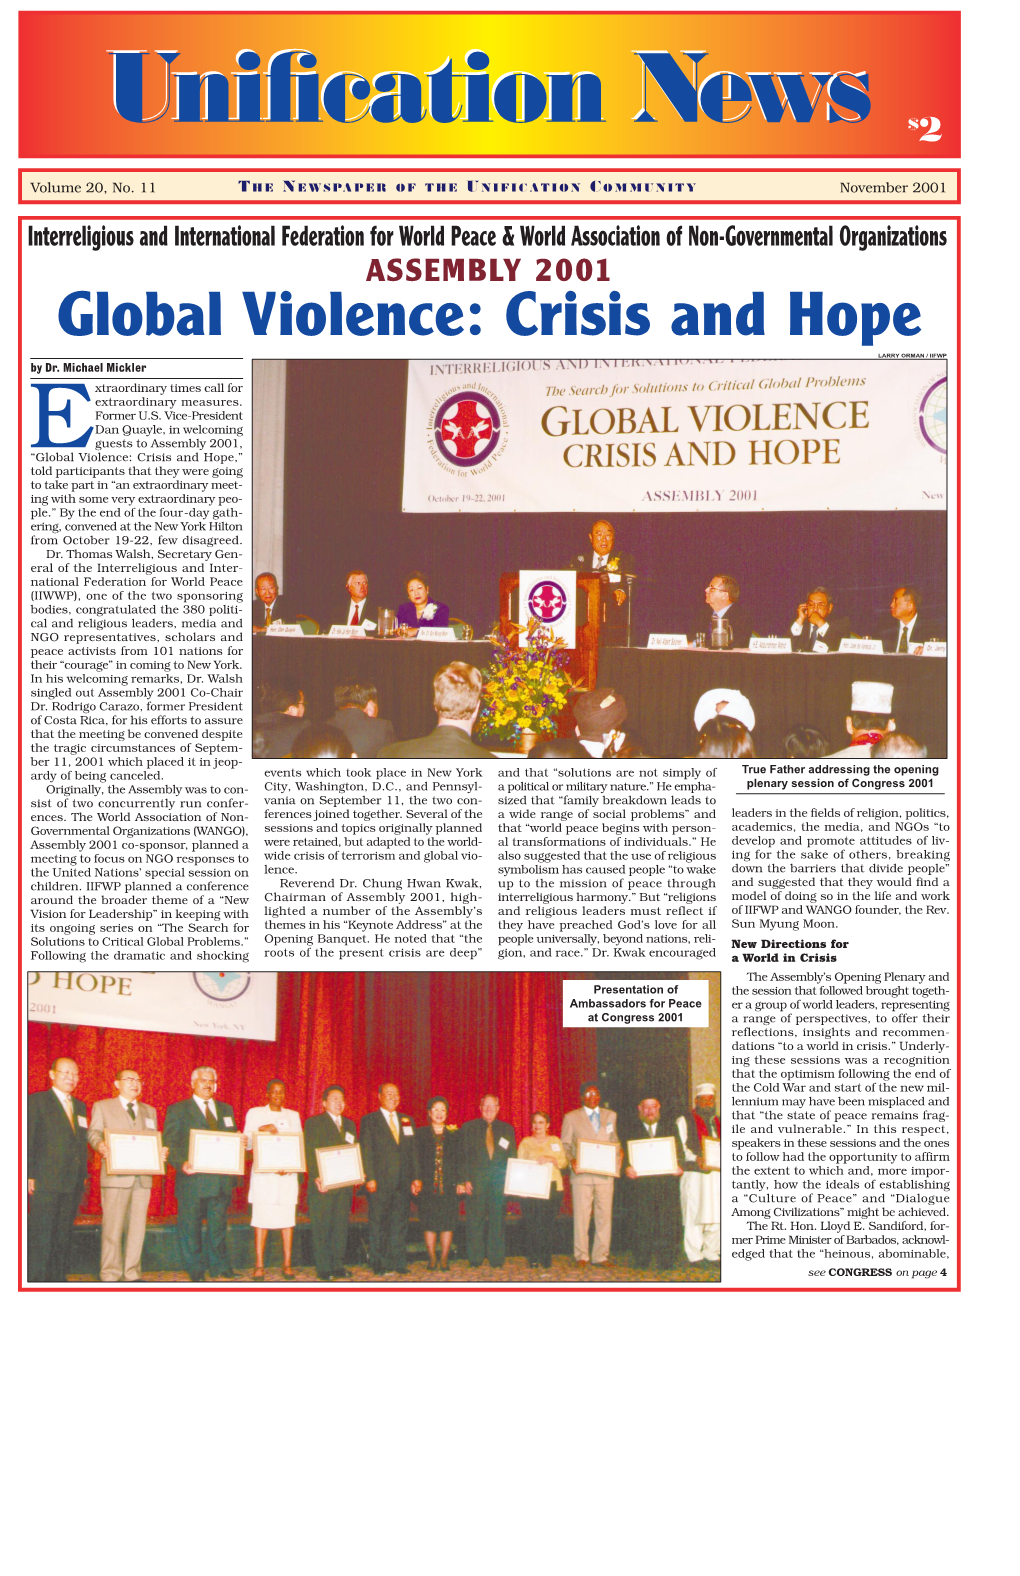 Global Violence: Crisis and Hope LARRY ORMAN / IIFWP by Dr